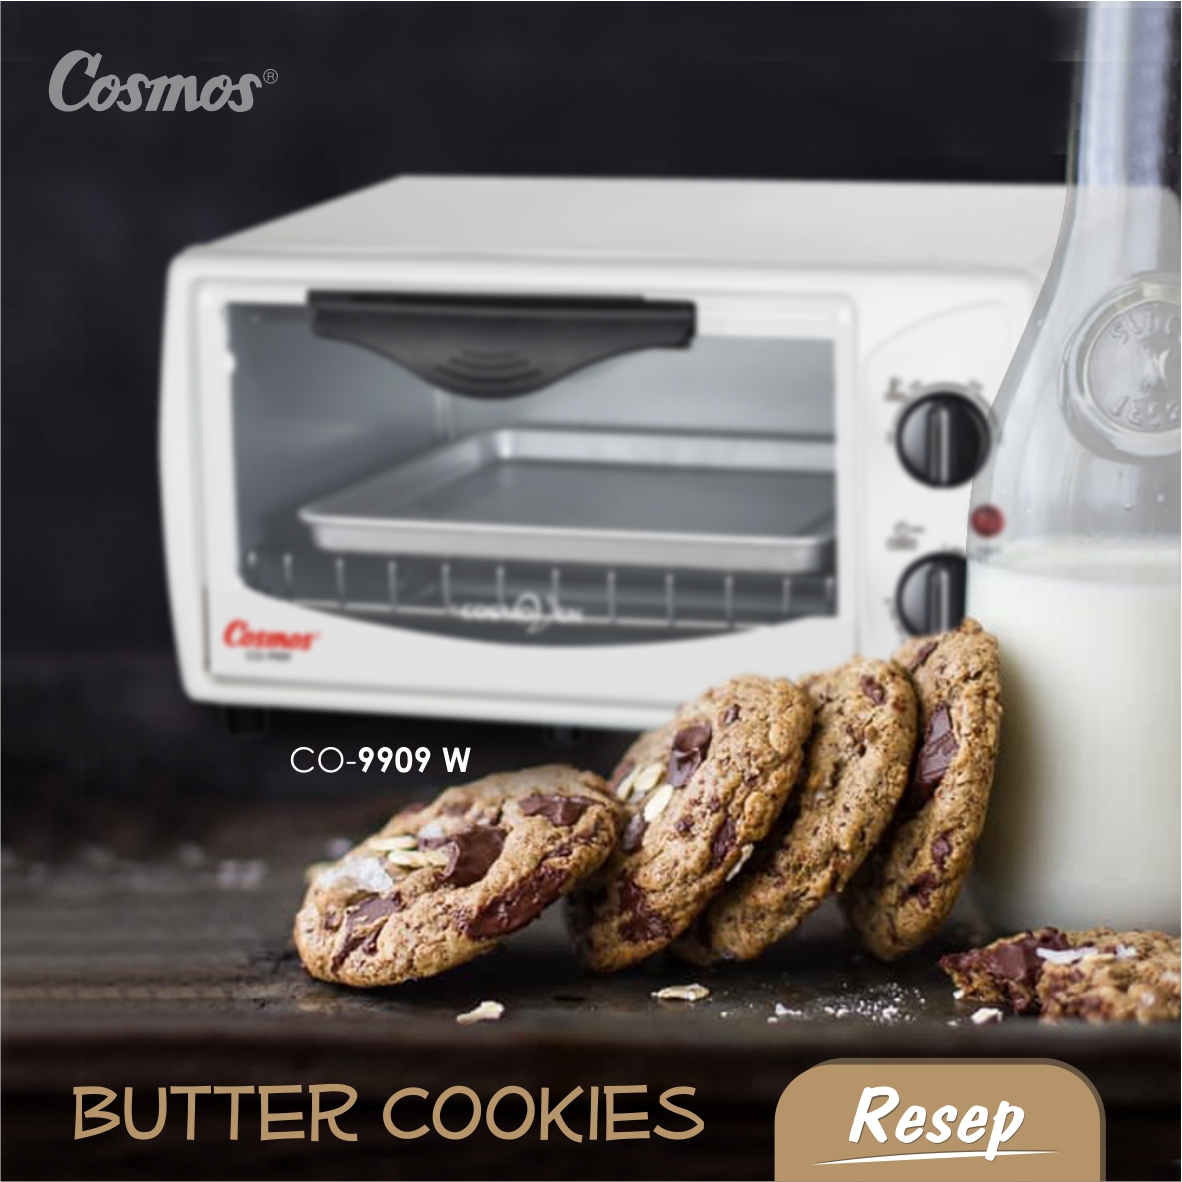 butter cookies resep cosmos Oven CO-9909 W